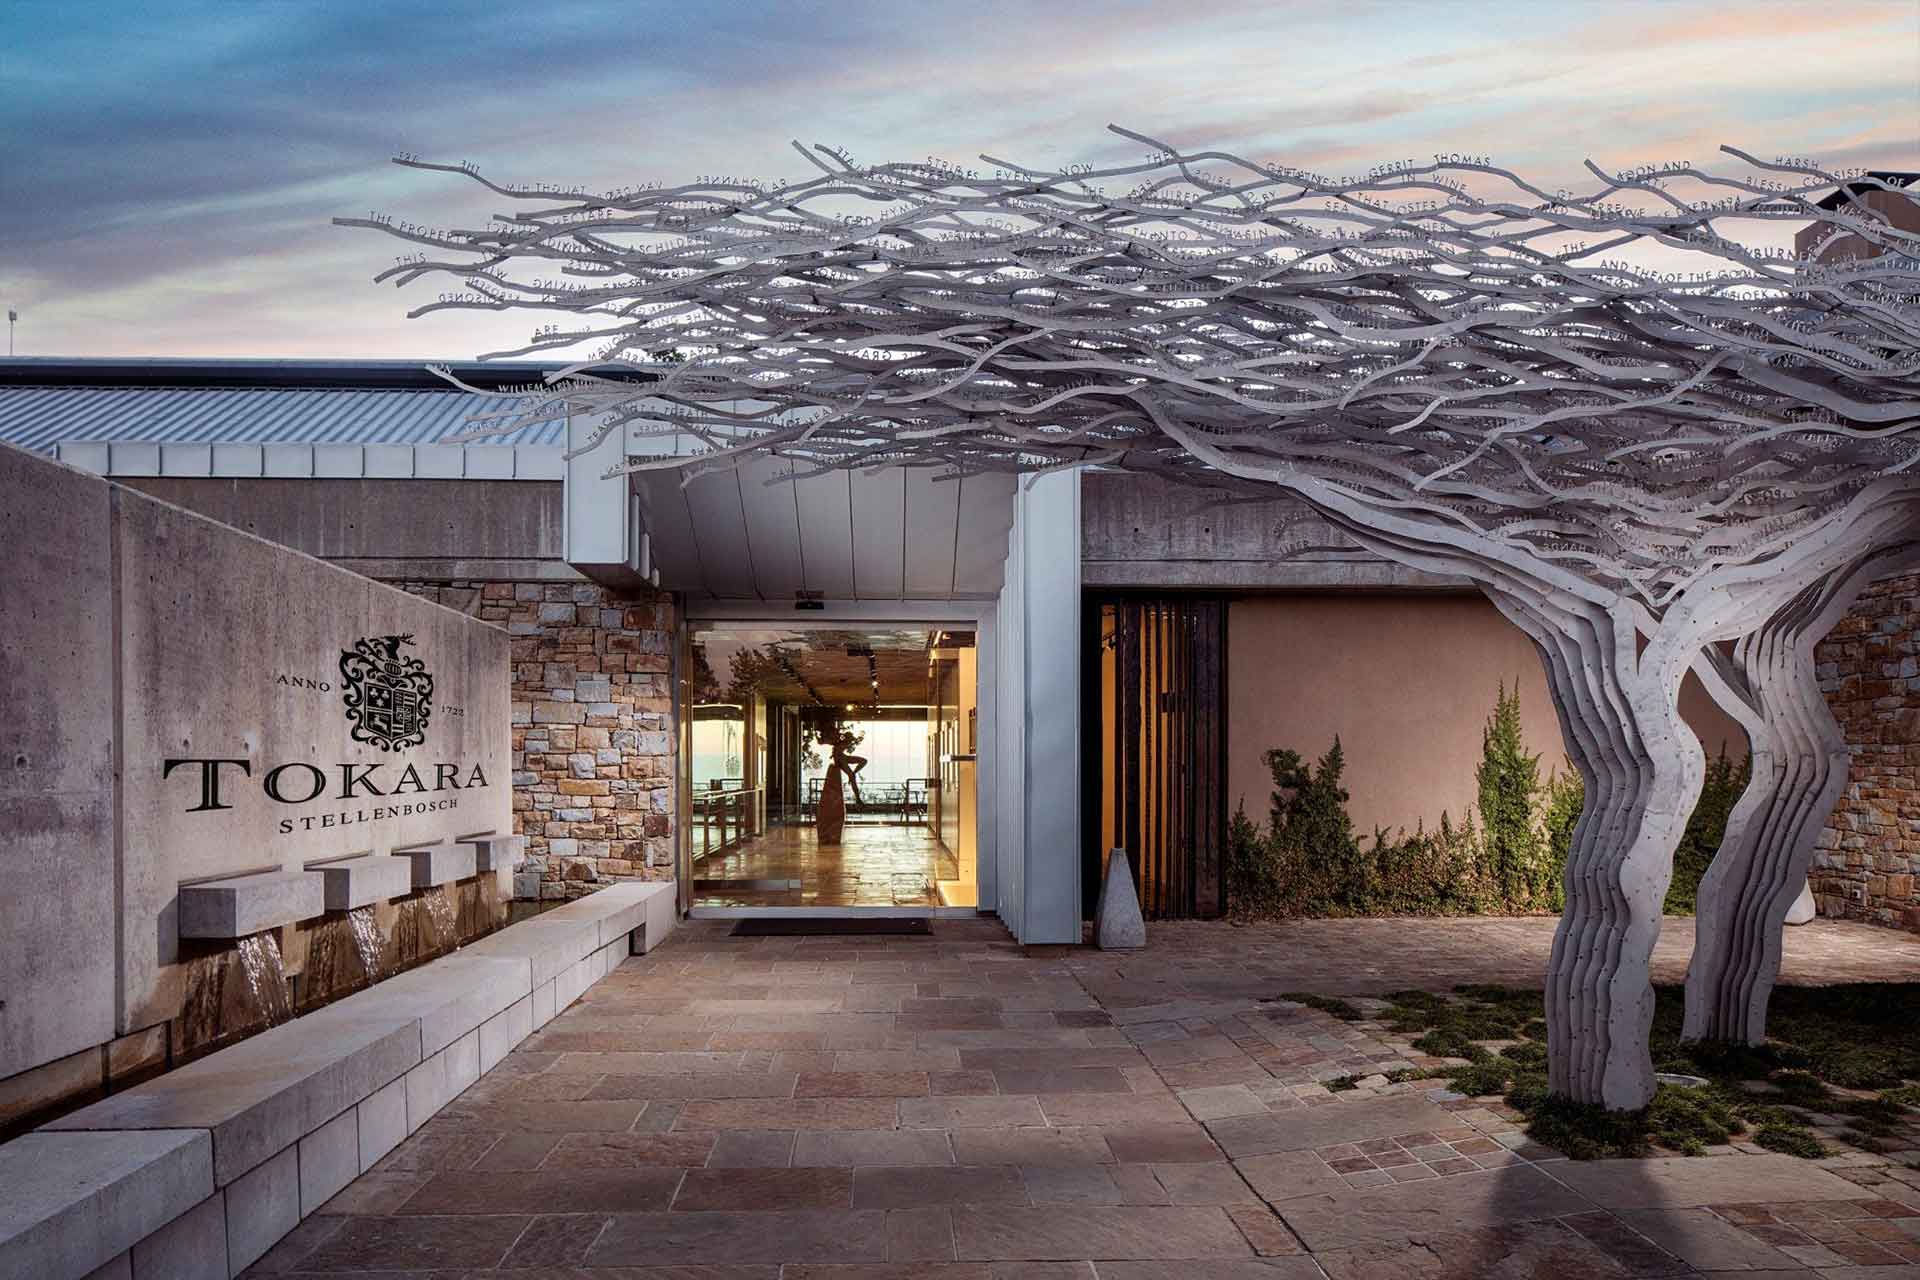 An iconic tree sculpture at the entrance of Tokara – one of the top Cape Winelands restaurants.